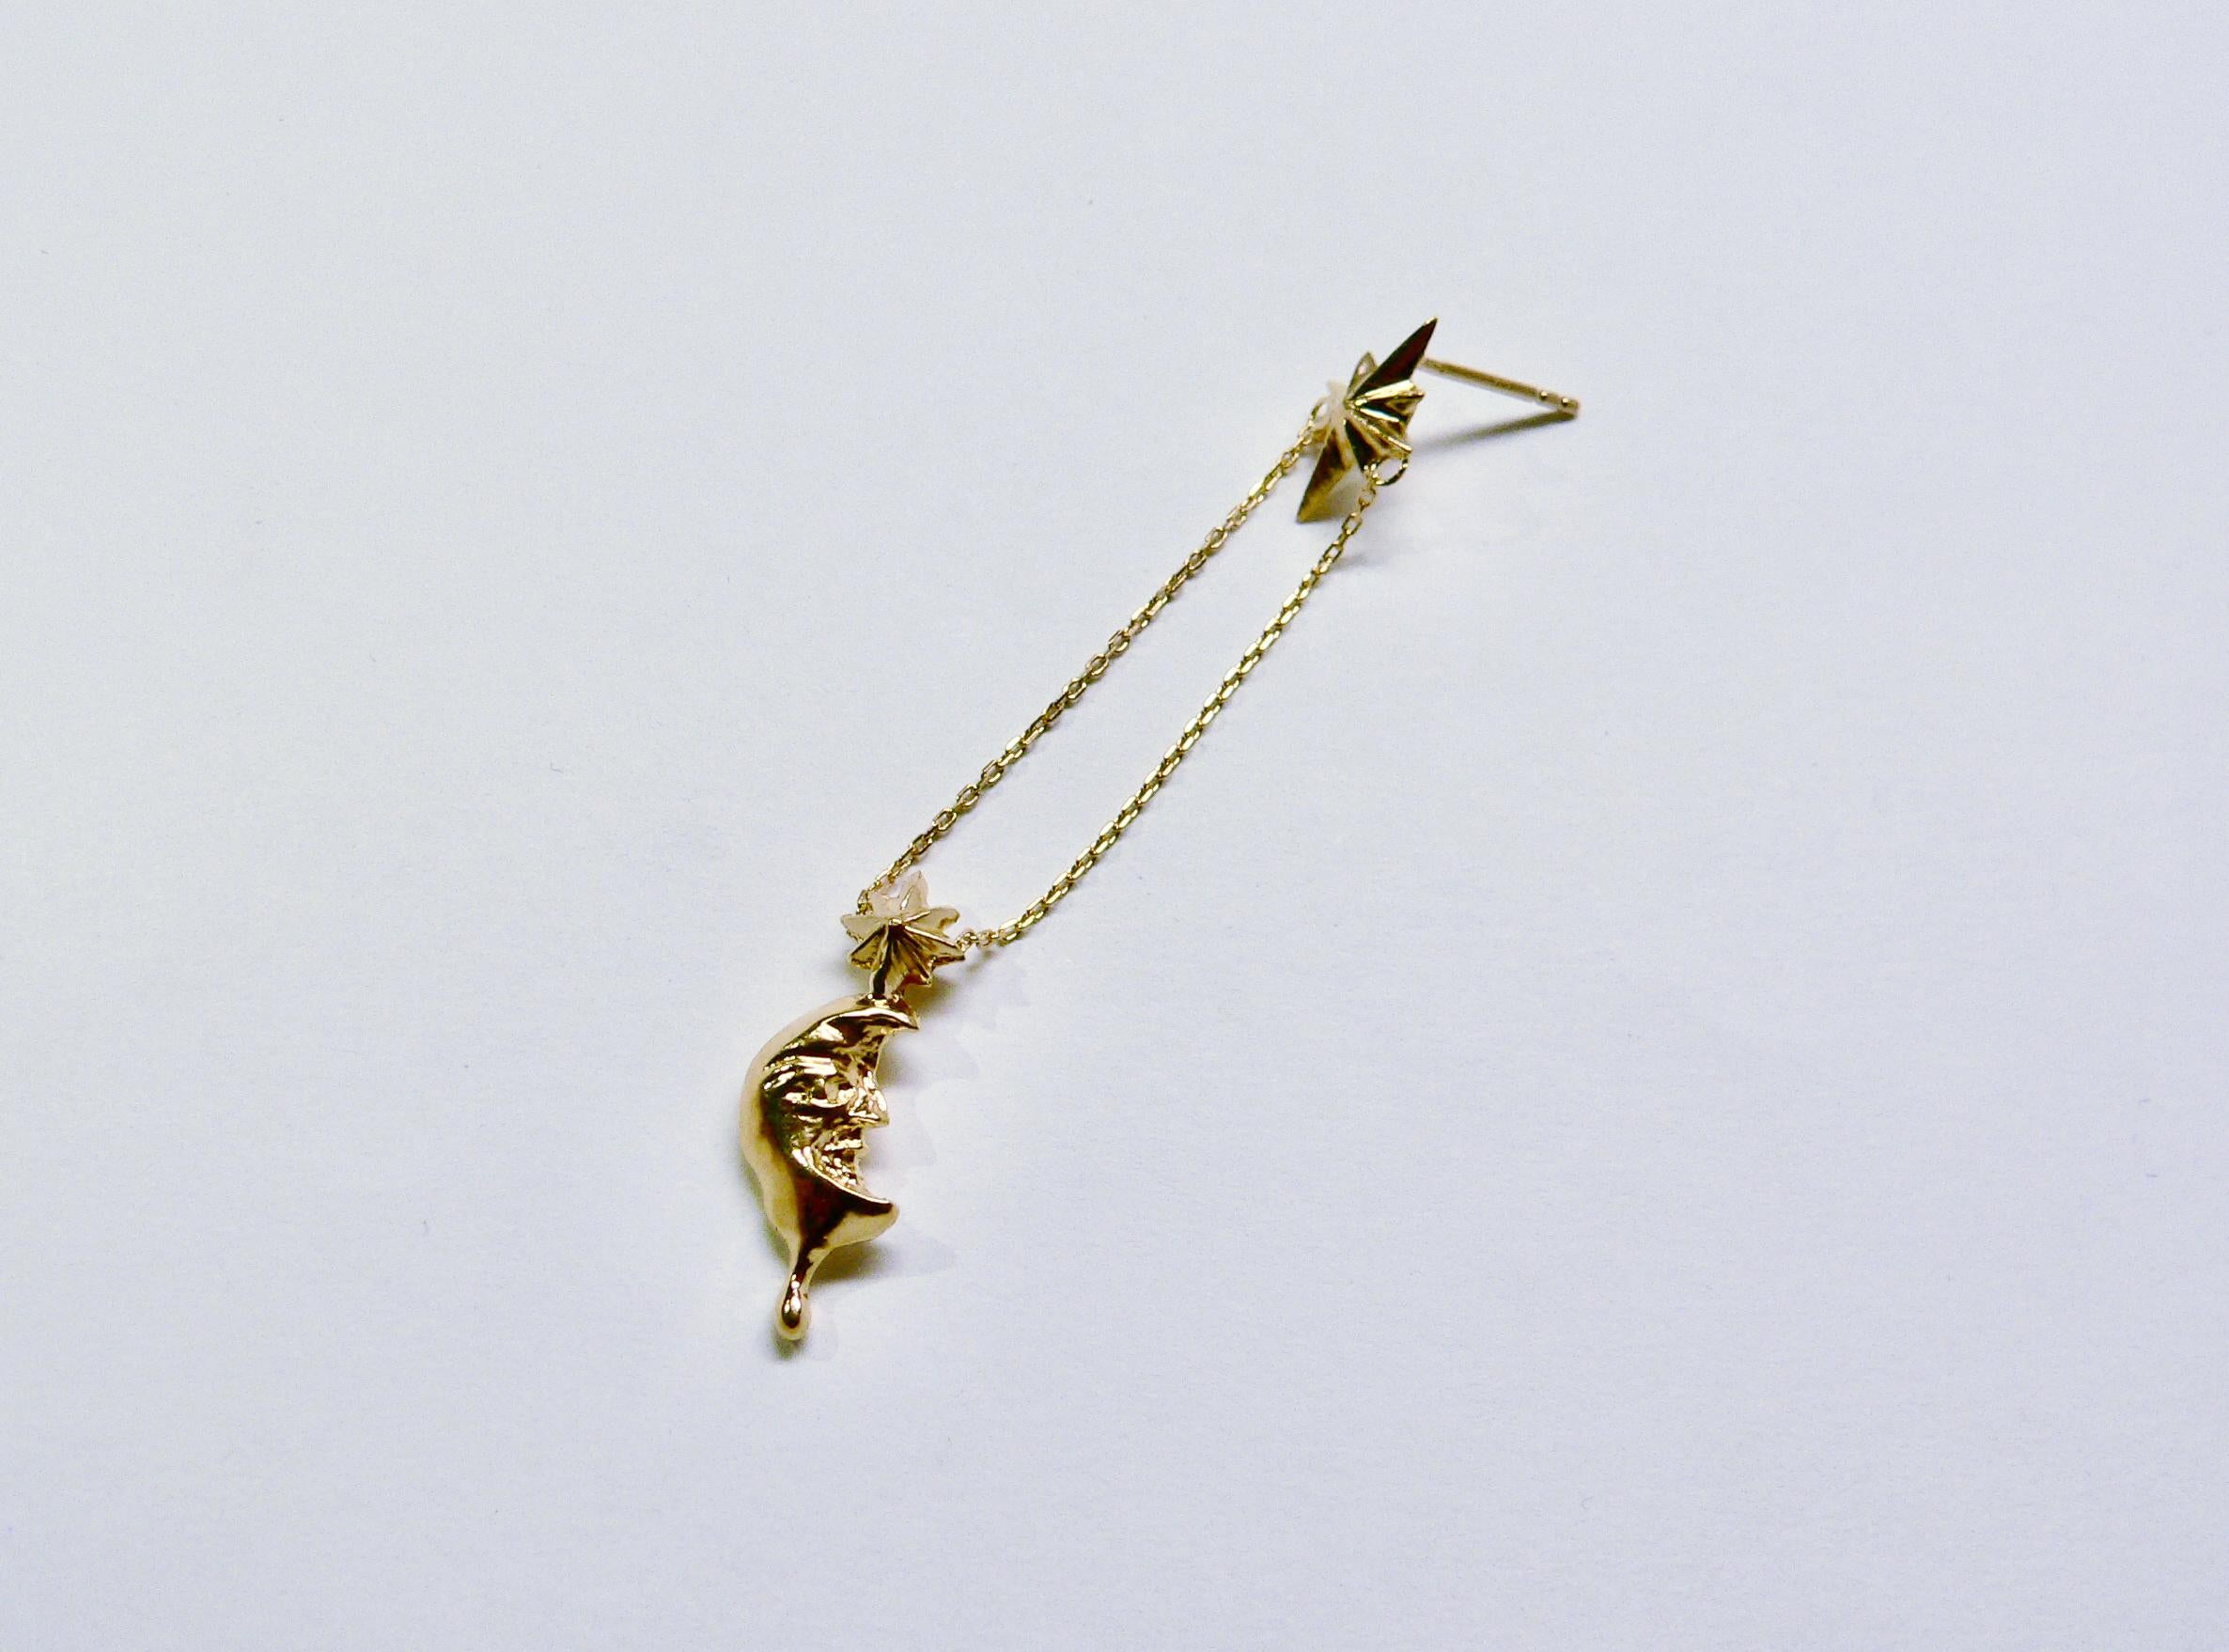 Artist Melting moon hanging on the Star Single Earring, Sterling Silver, Gold-Plated  For Sale